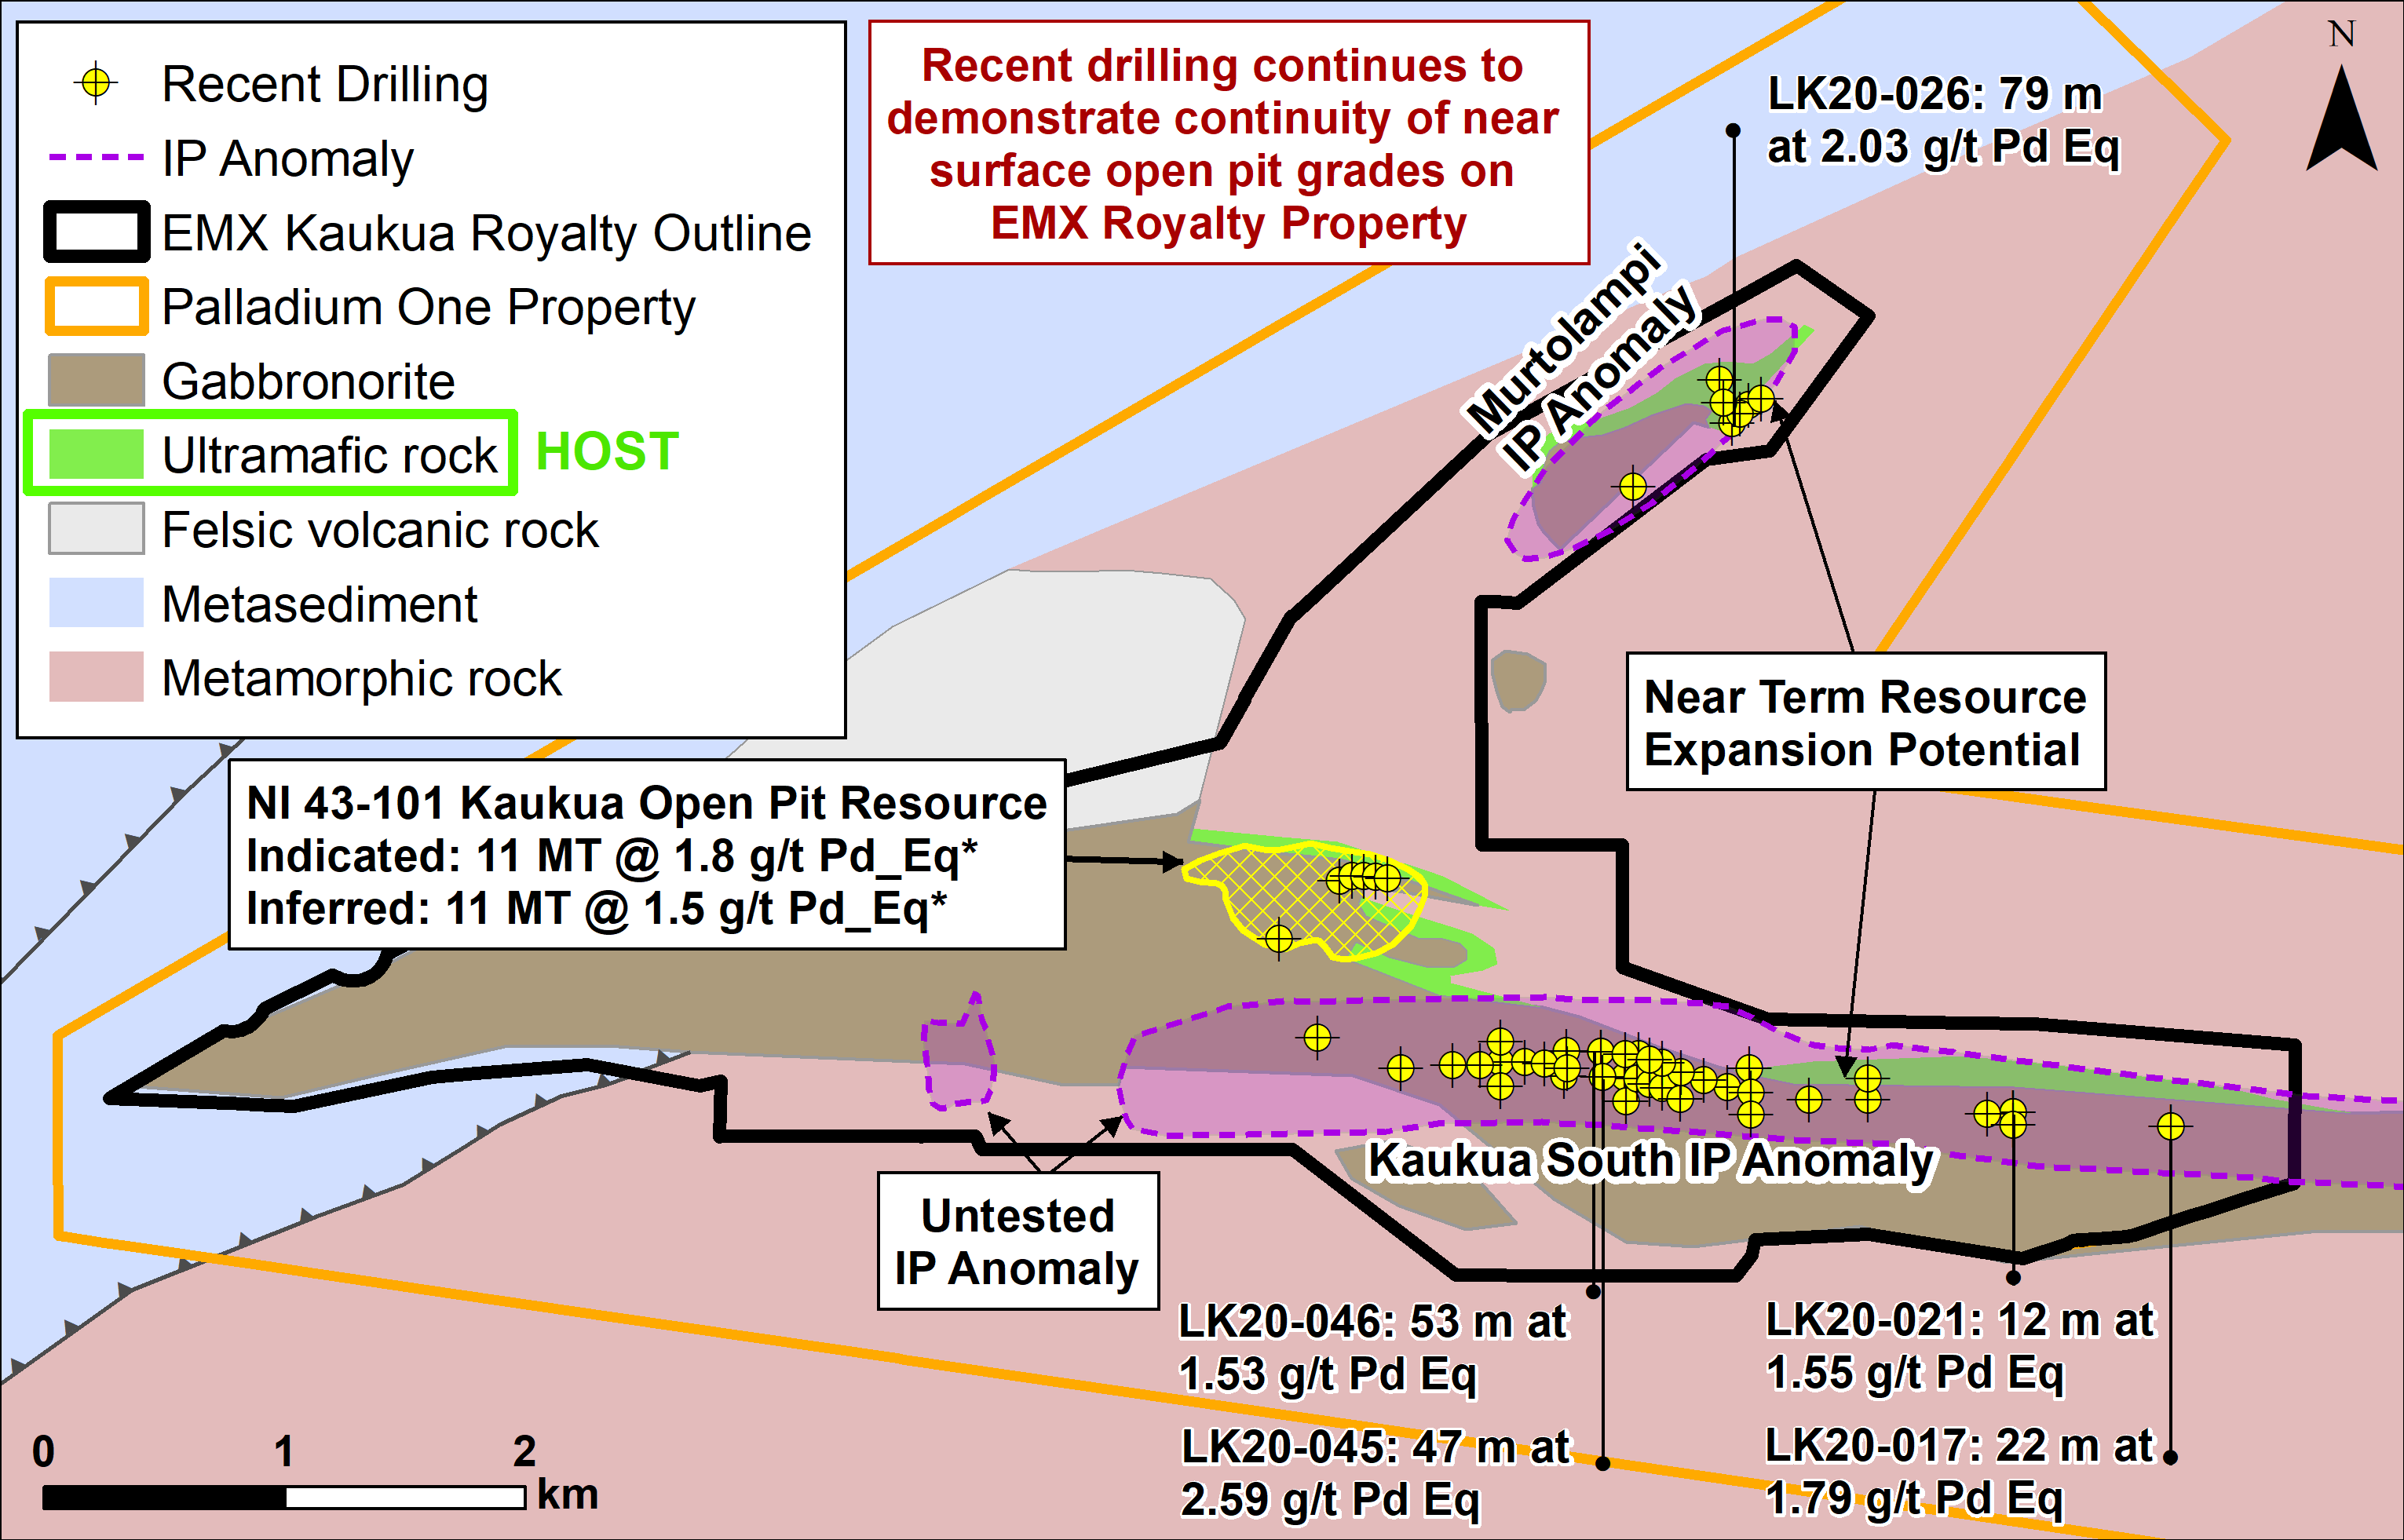 Geologic map of Kaukua and drilling activity.